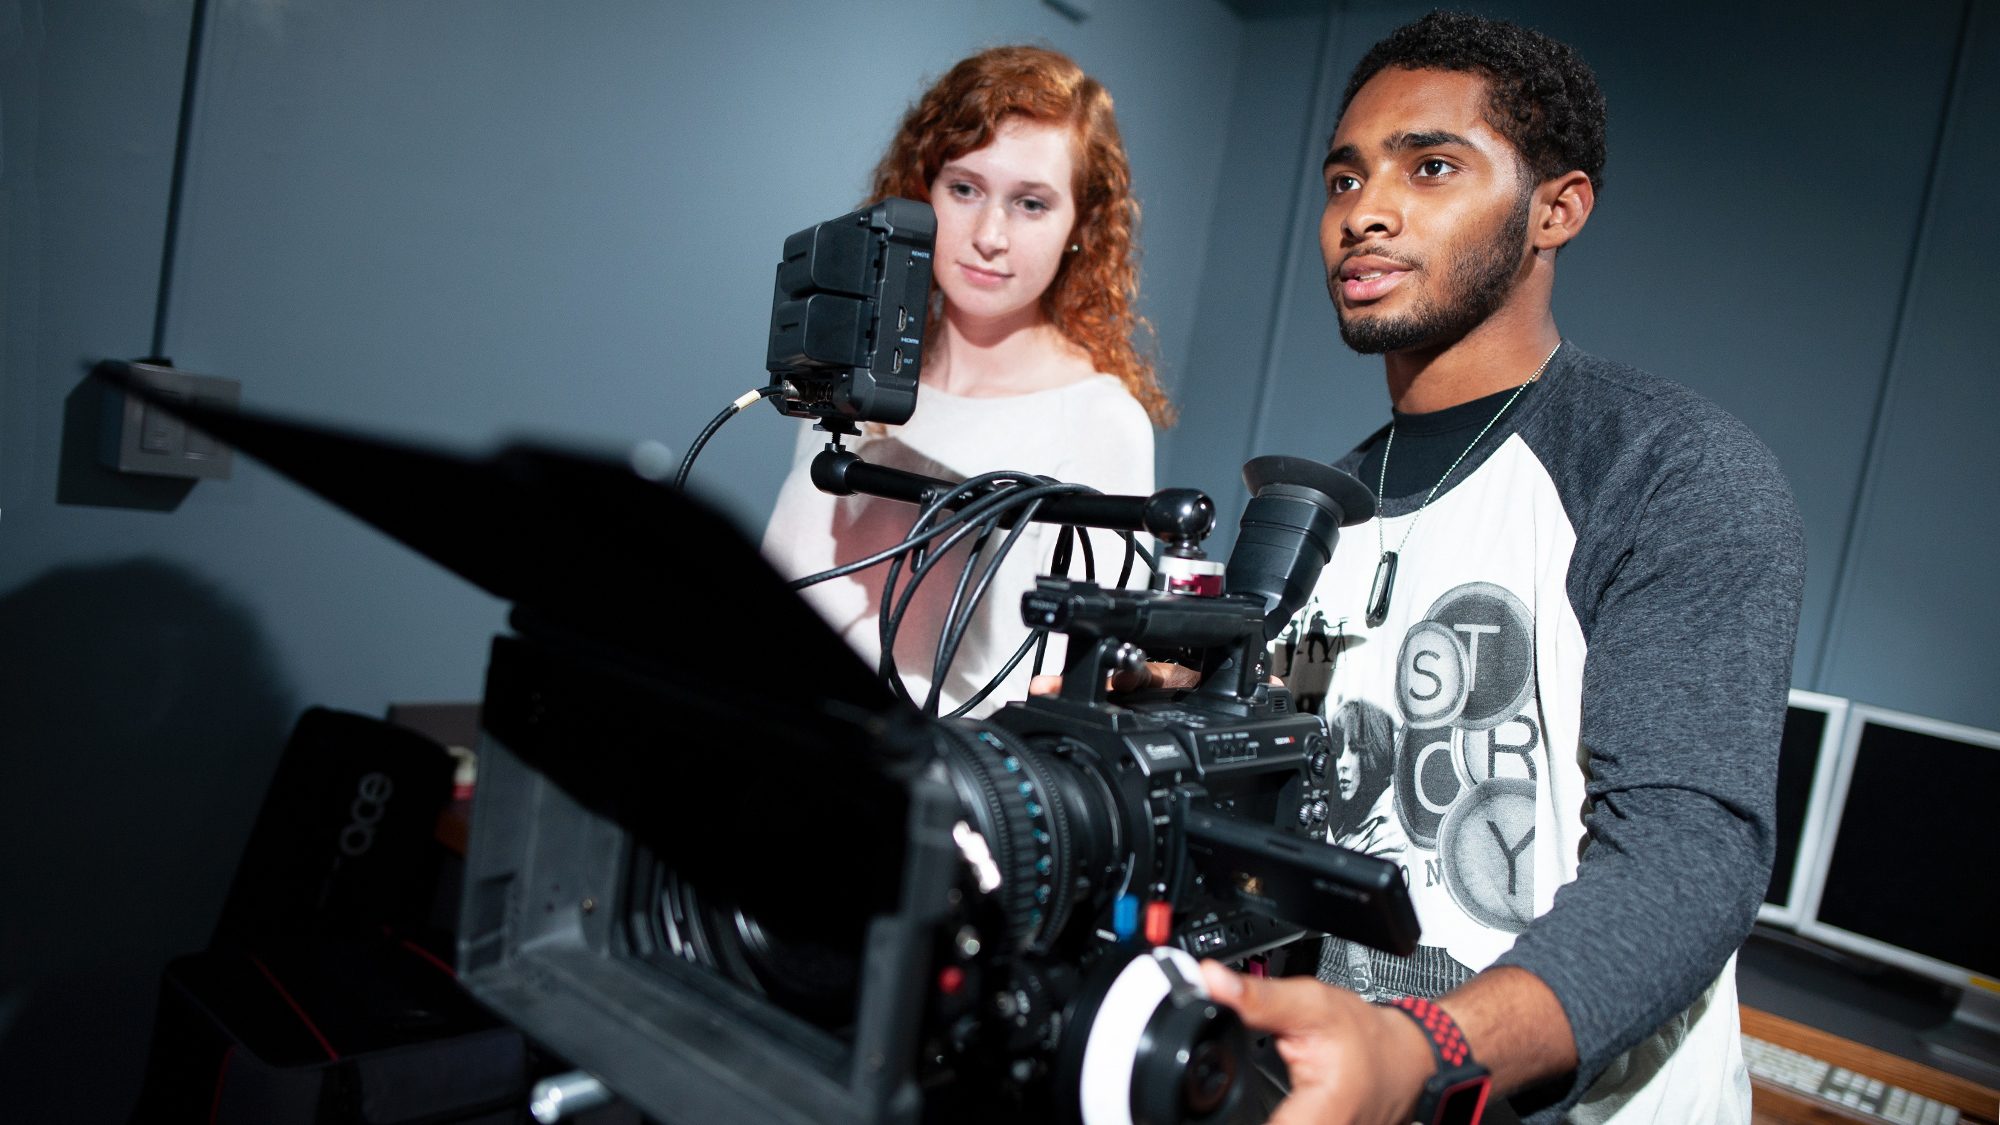 Students in Communications, Film and Media